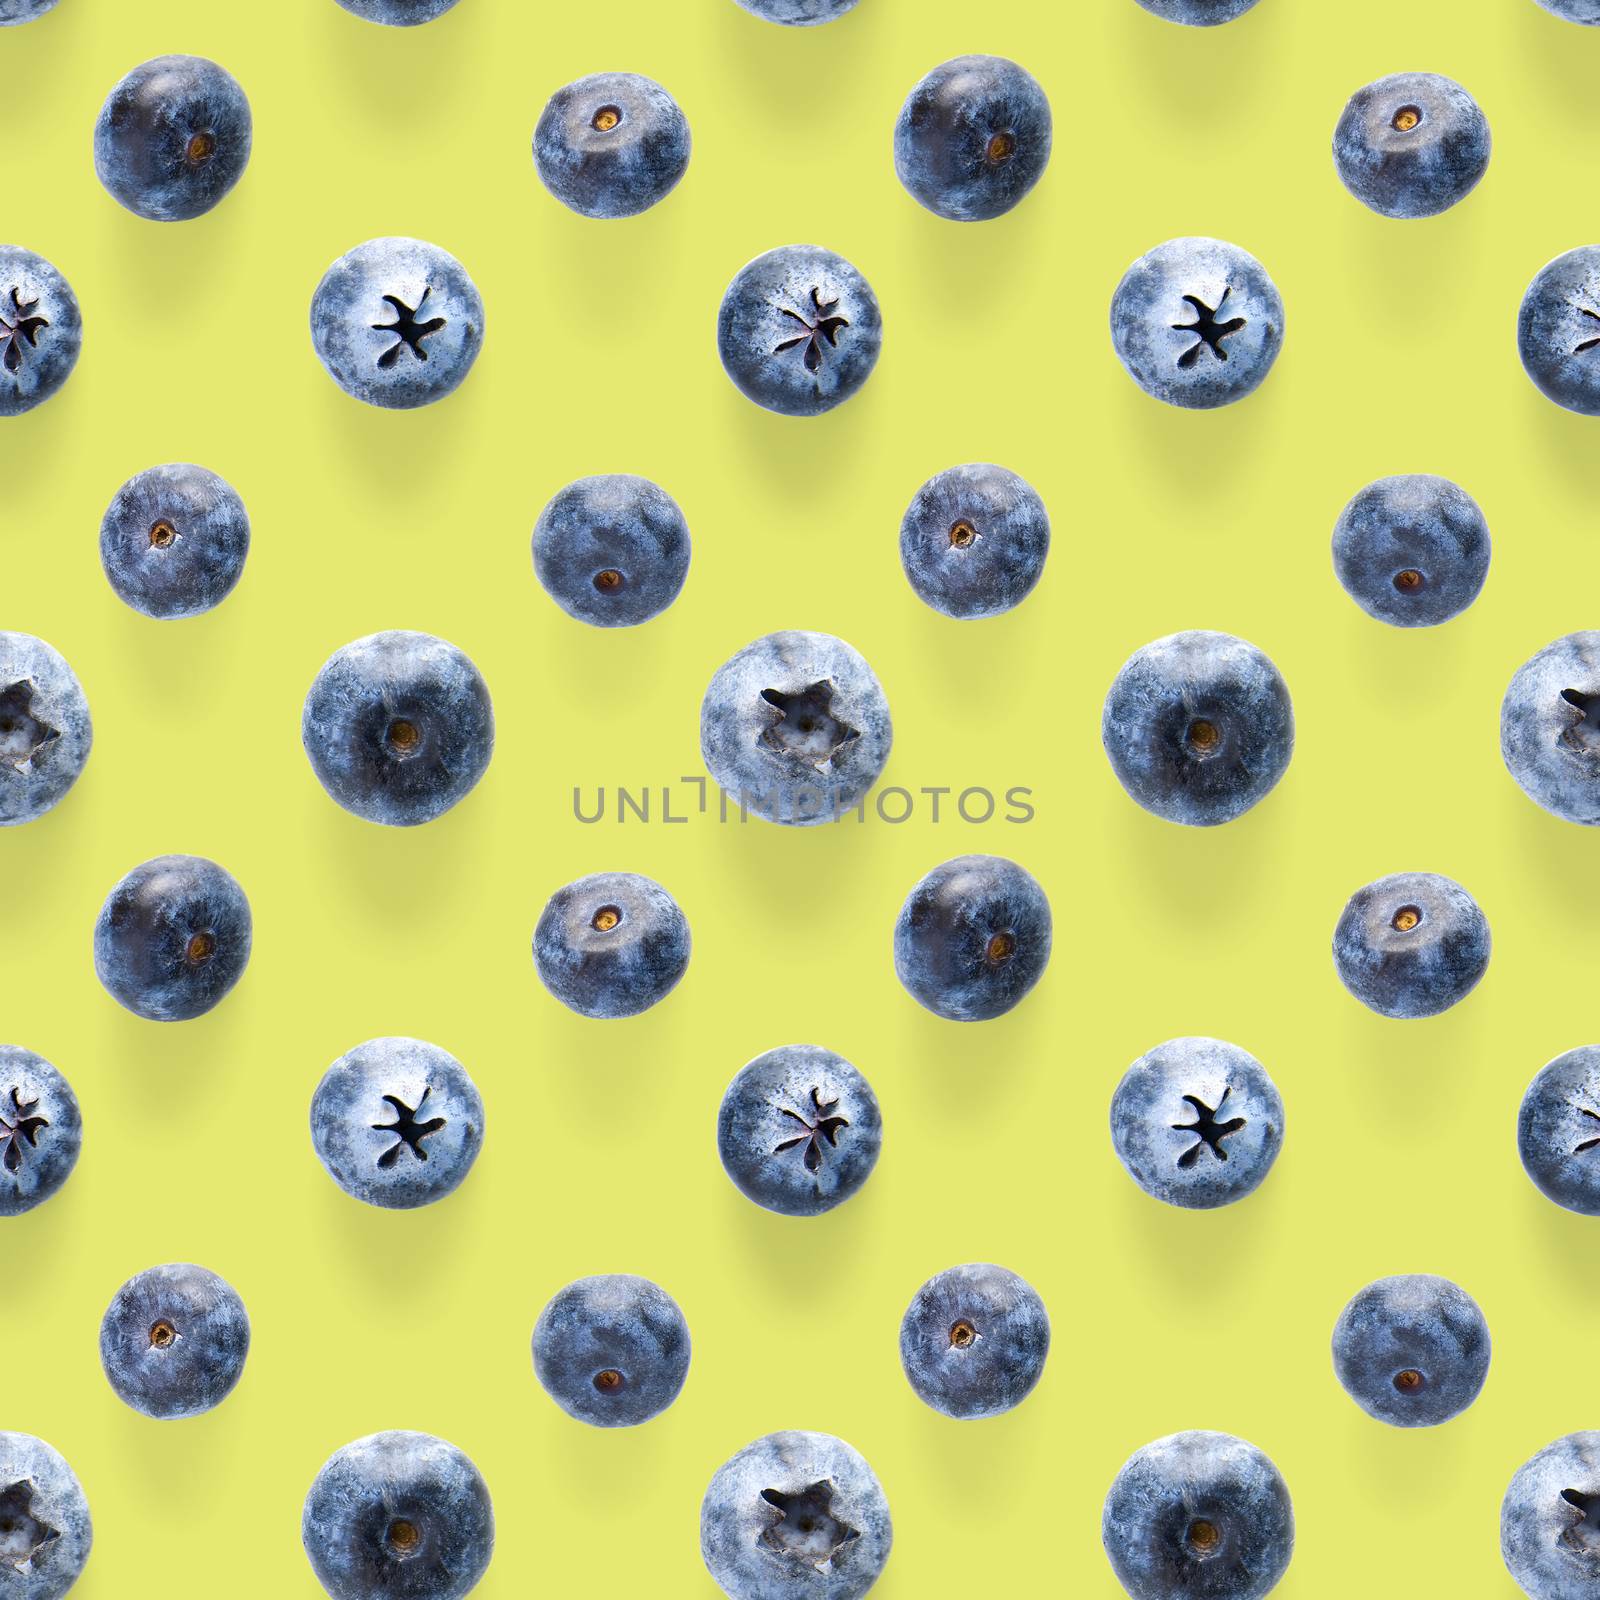 Trendy seamless pattern of blueberries. Blueberry pattern isolated on green background. Blueberry flat lay, can be used for textile, prints, packing designs orother moden andcreative works